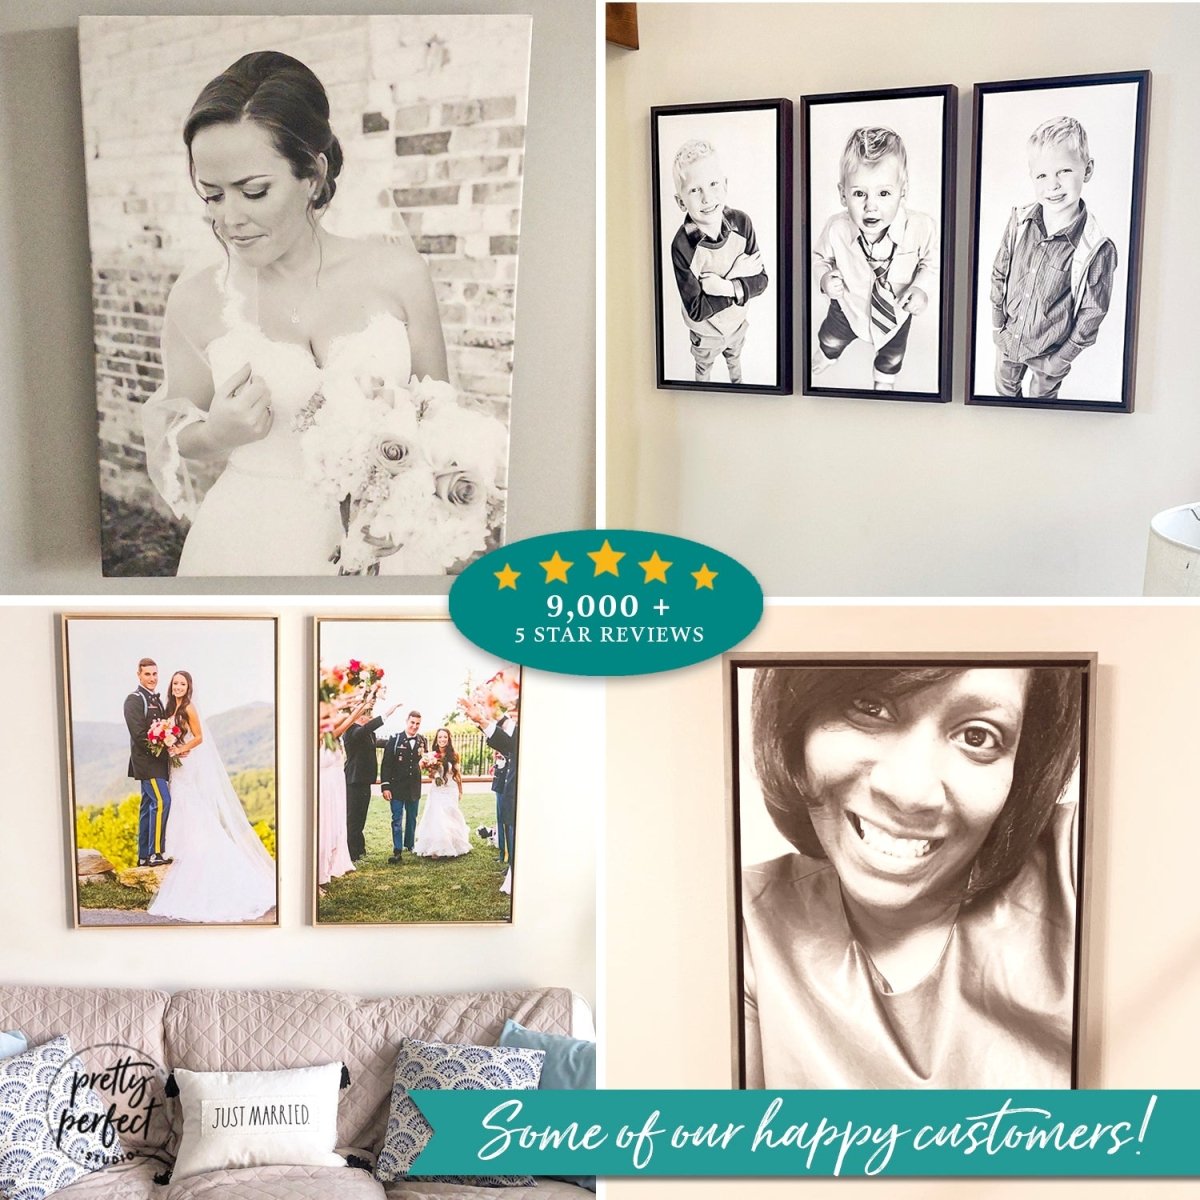 Customer product review for custom photo canvas wall art by Pretty Perfect Studio